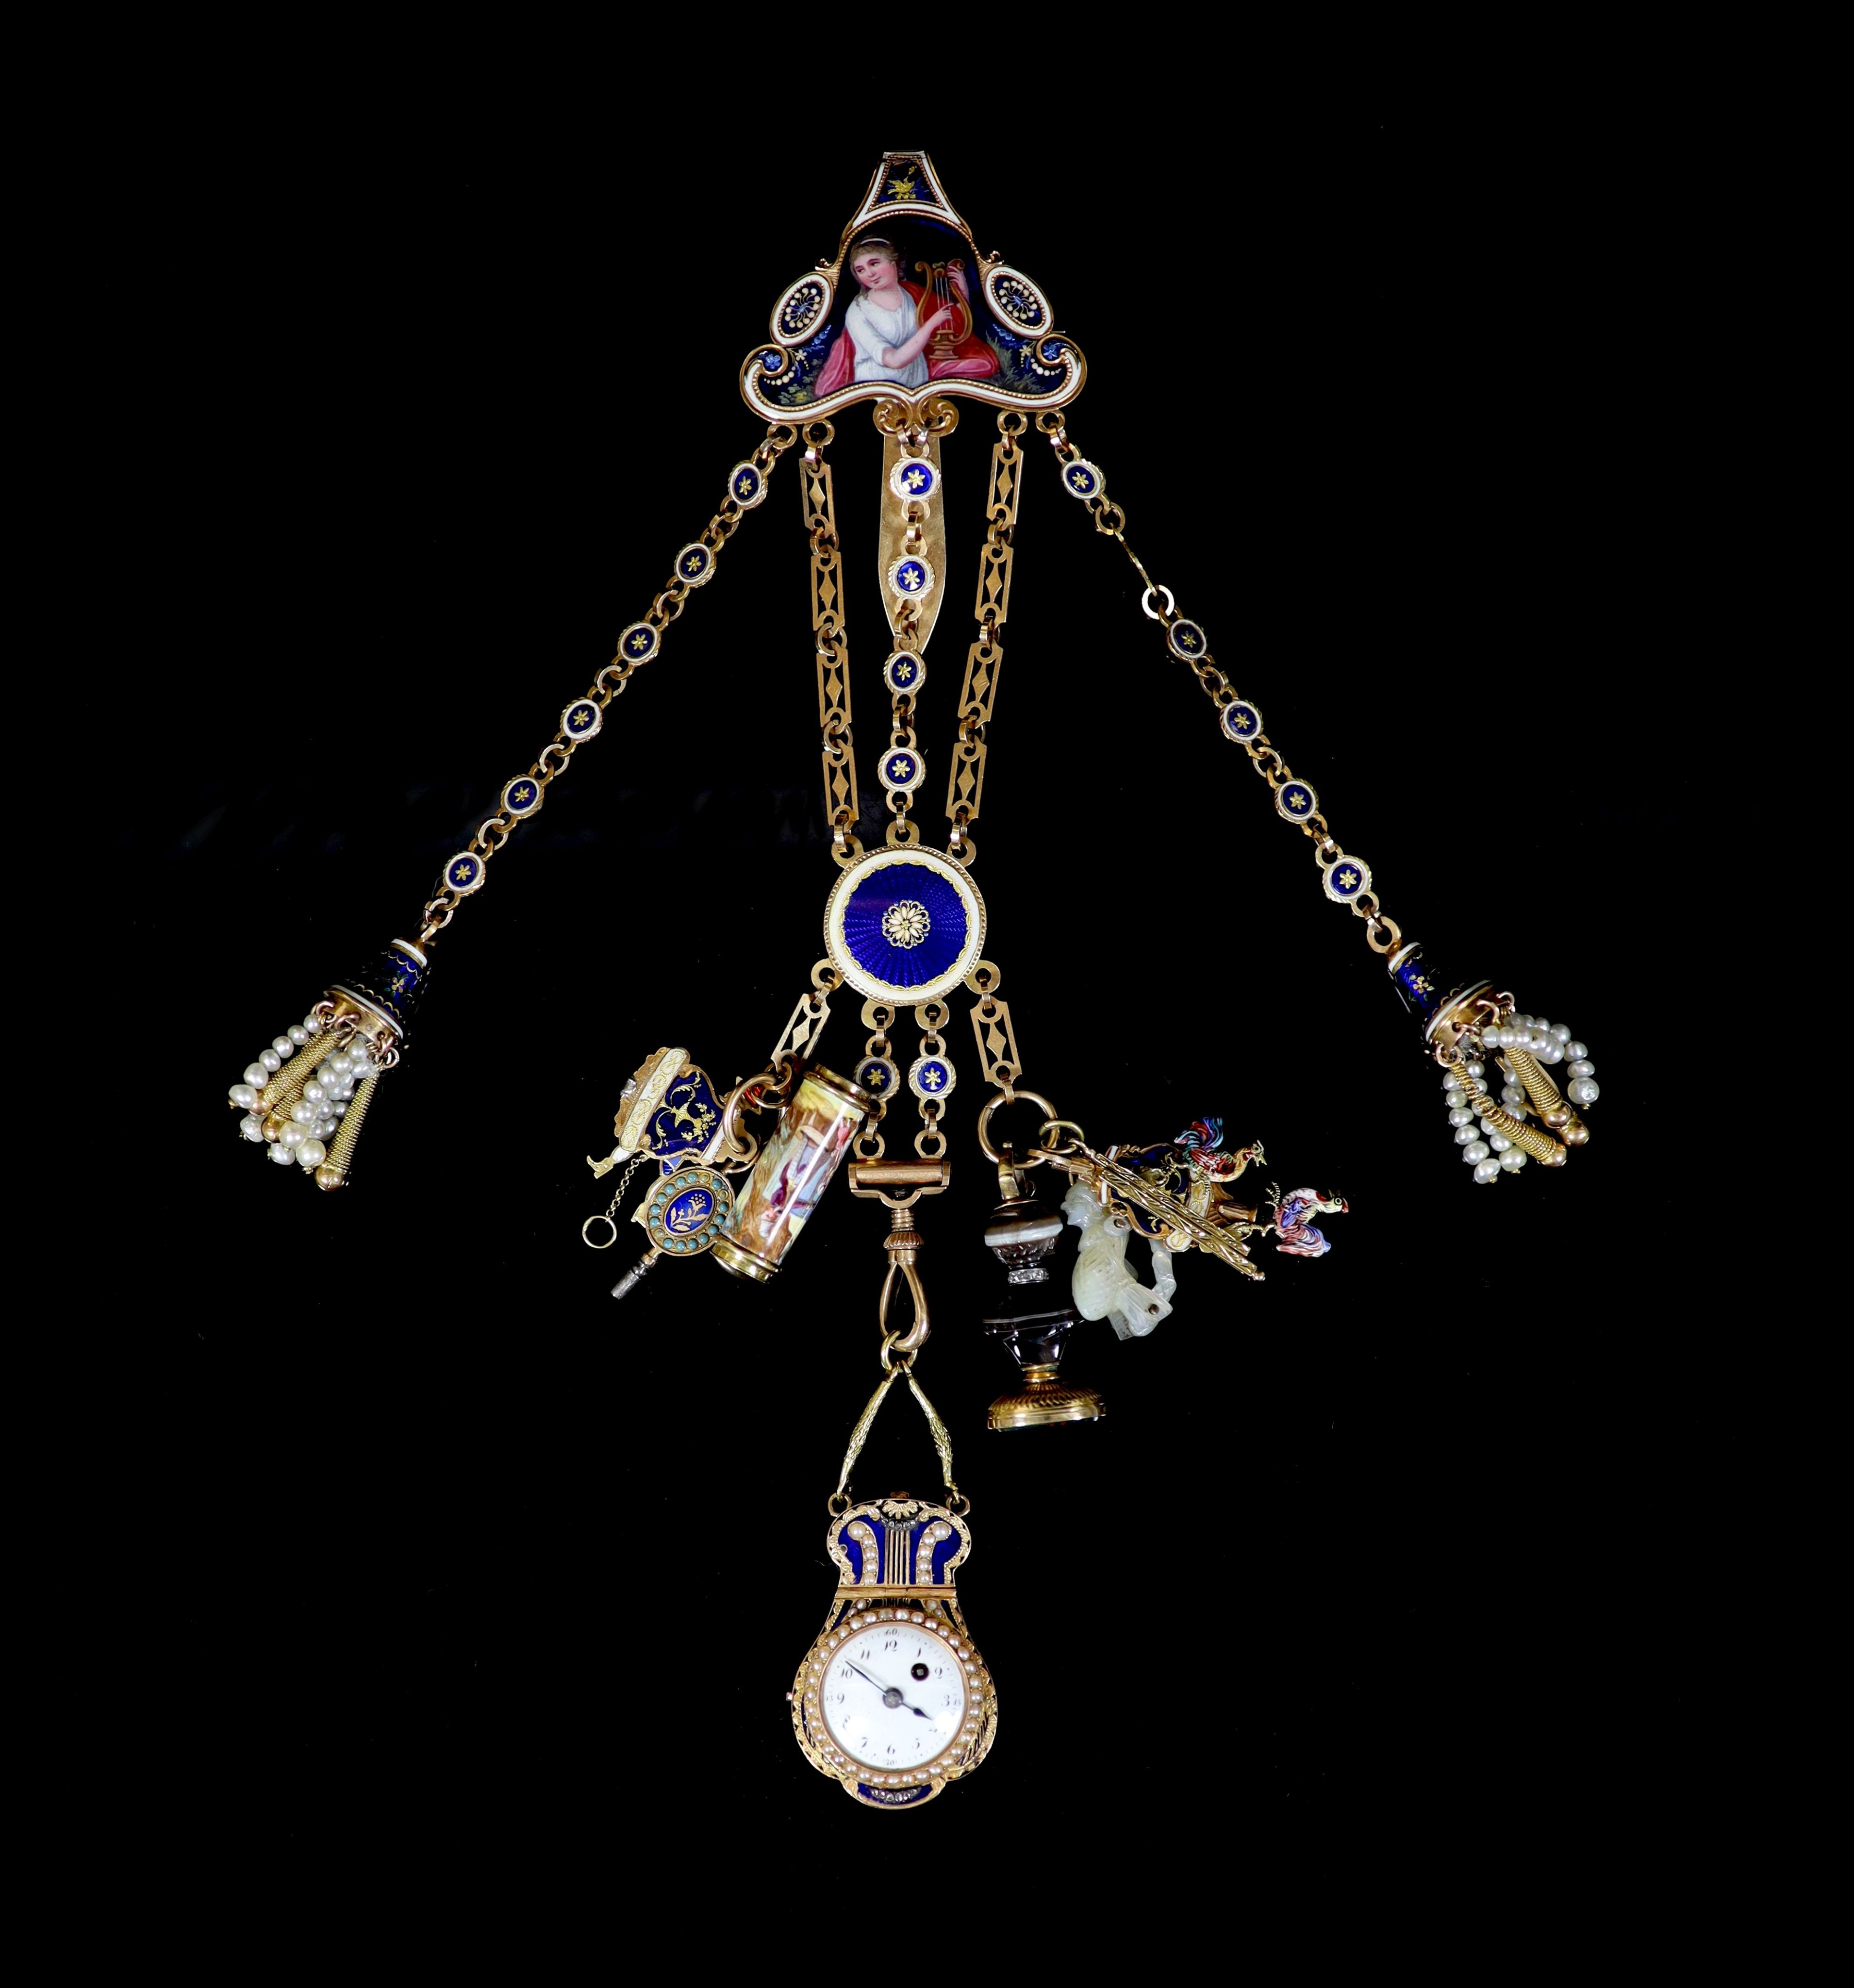 An early 19th century French or Swiss gold and enamel chatelaine, hung with eleven assorted accoutrements